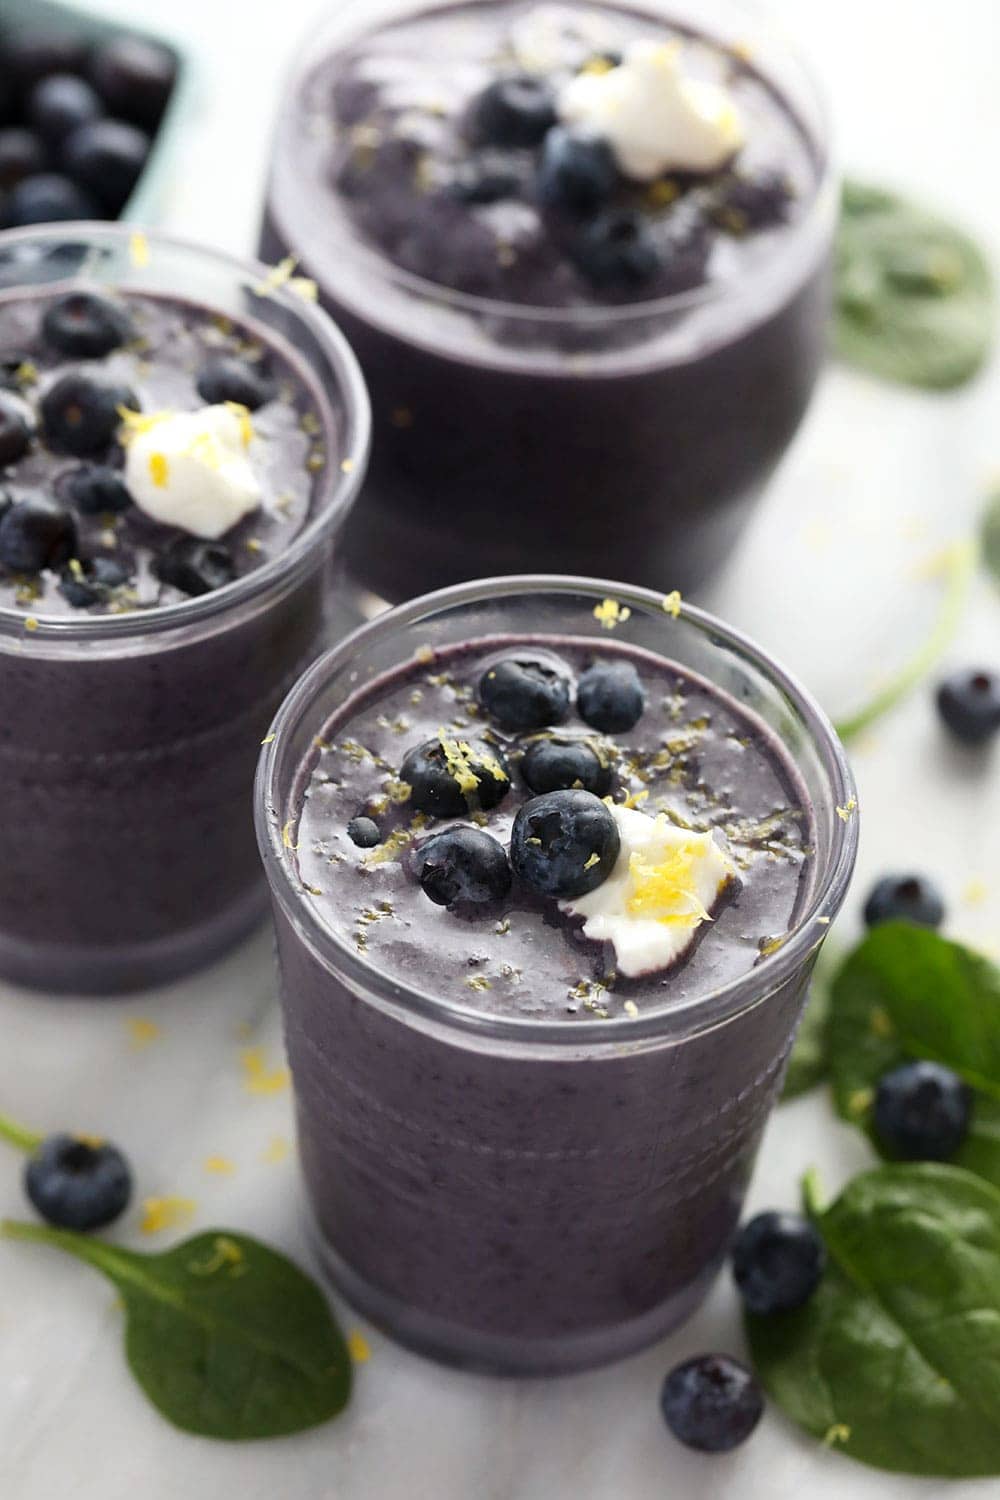 Blueberry smoothie in a cup.